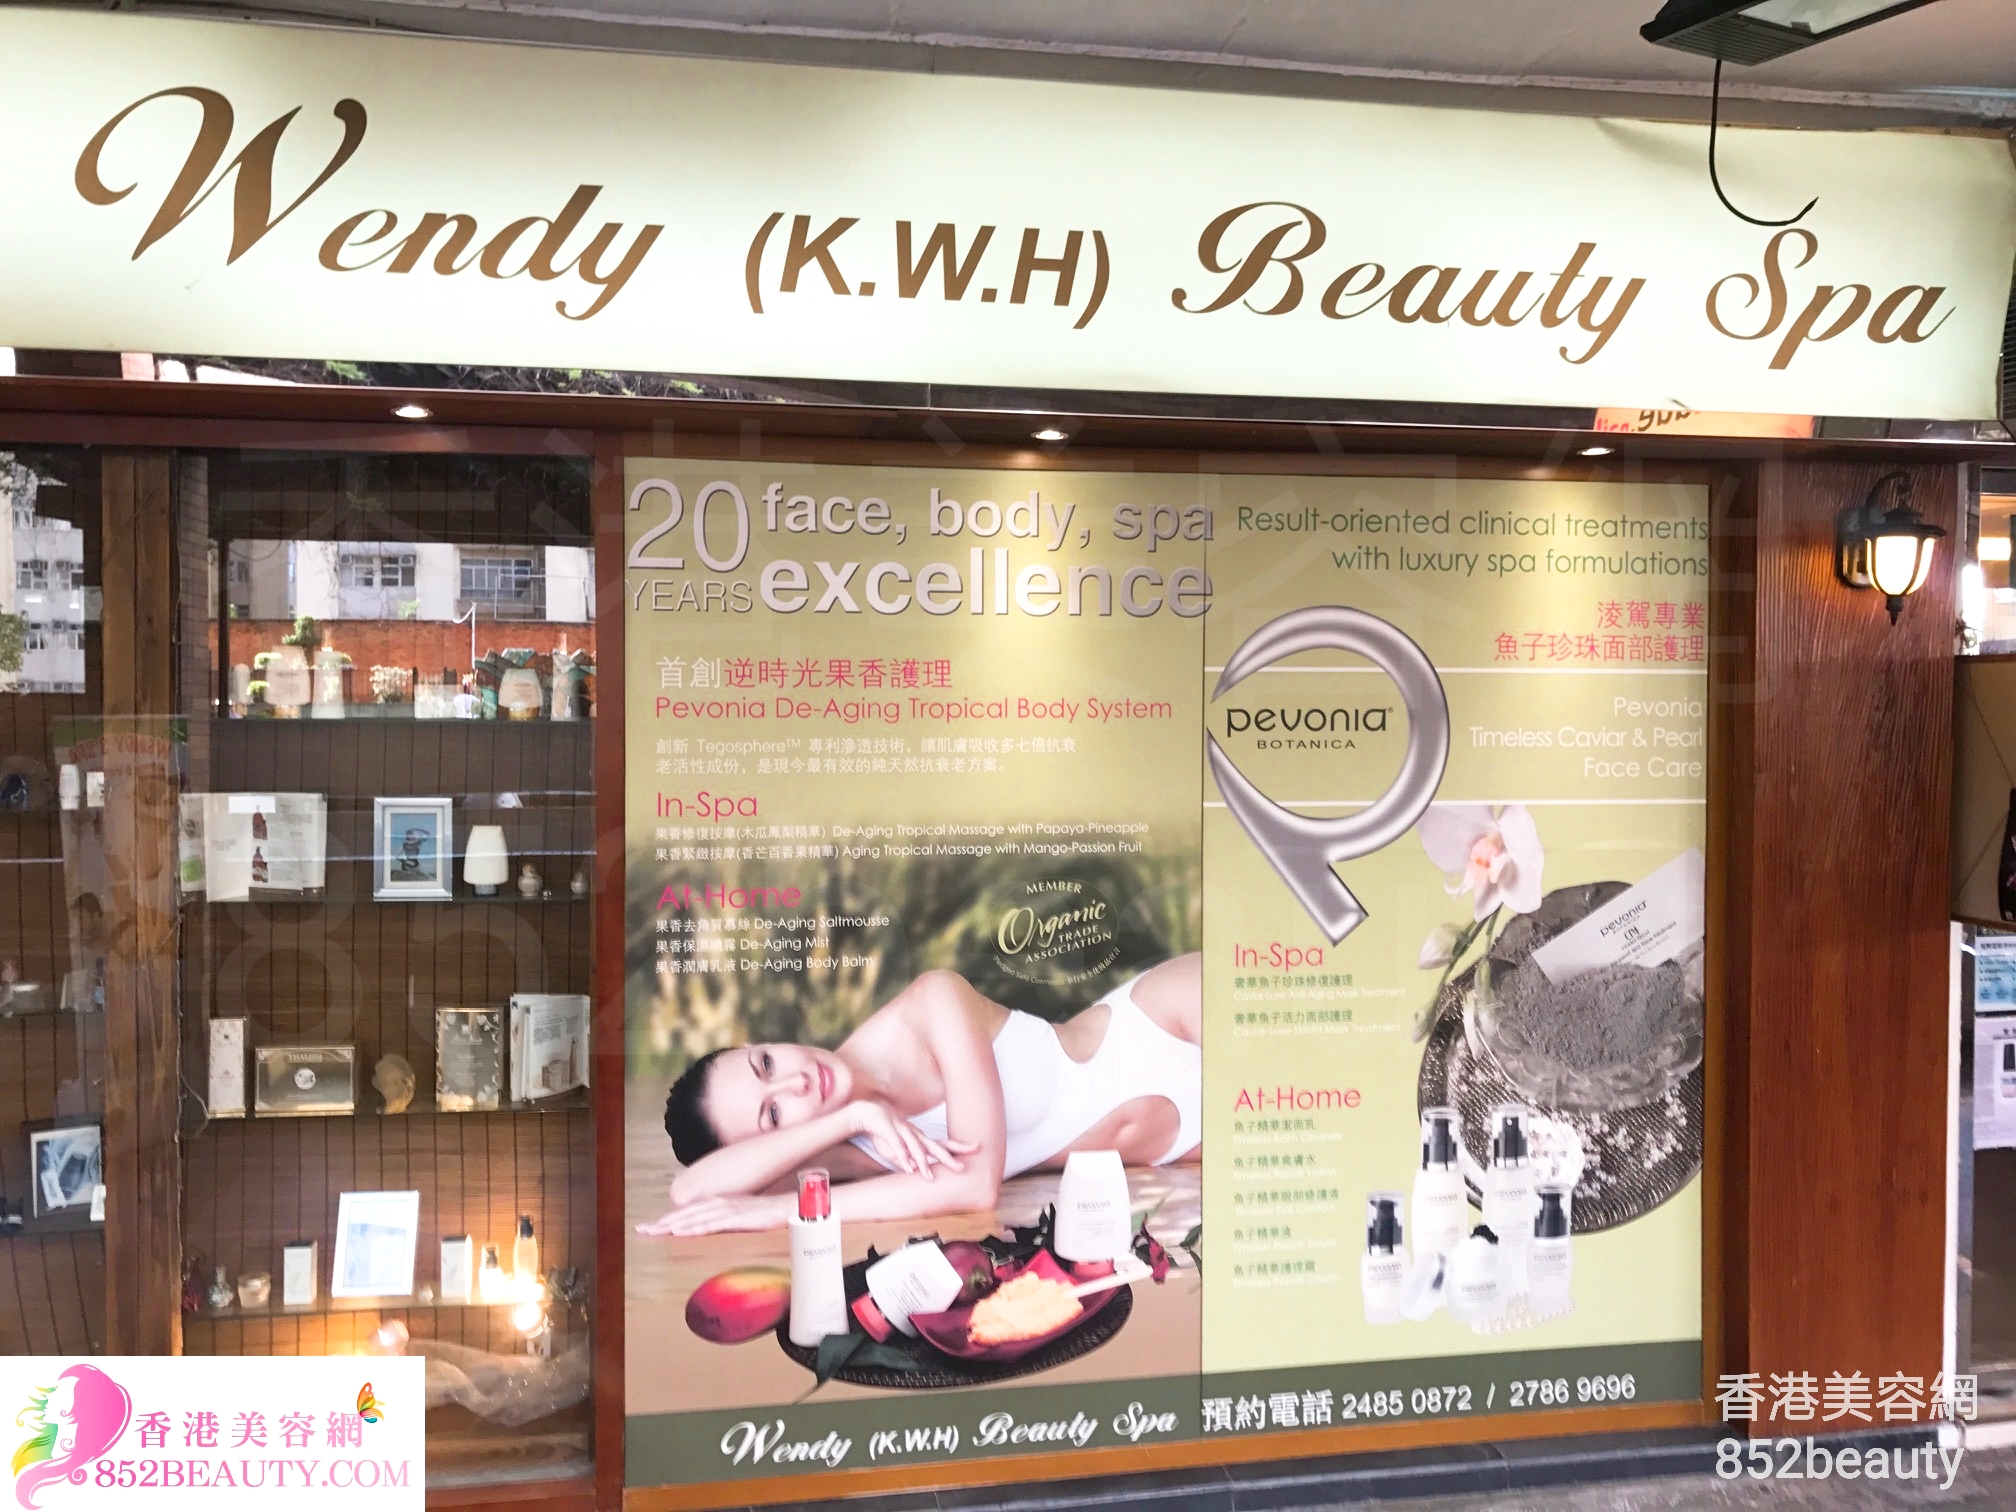 Hand and foot care: Wendy (K.W.H) Beauty Spa